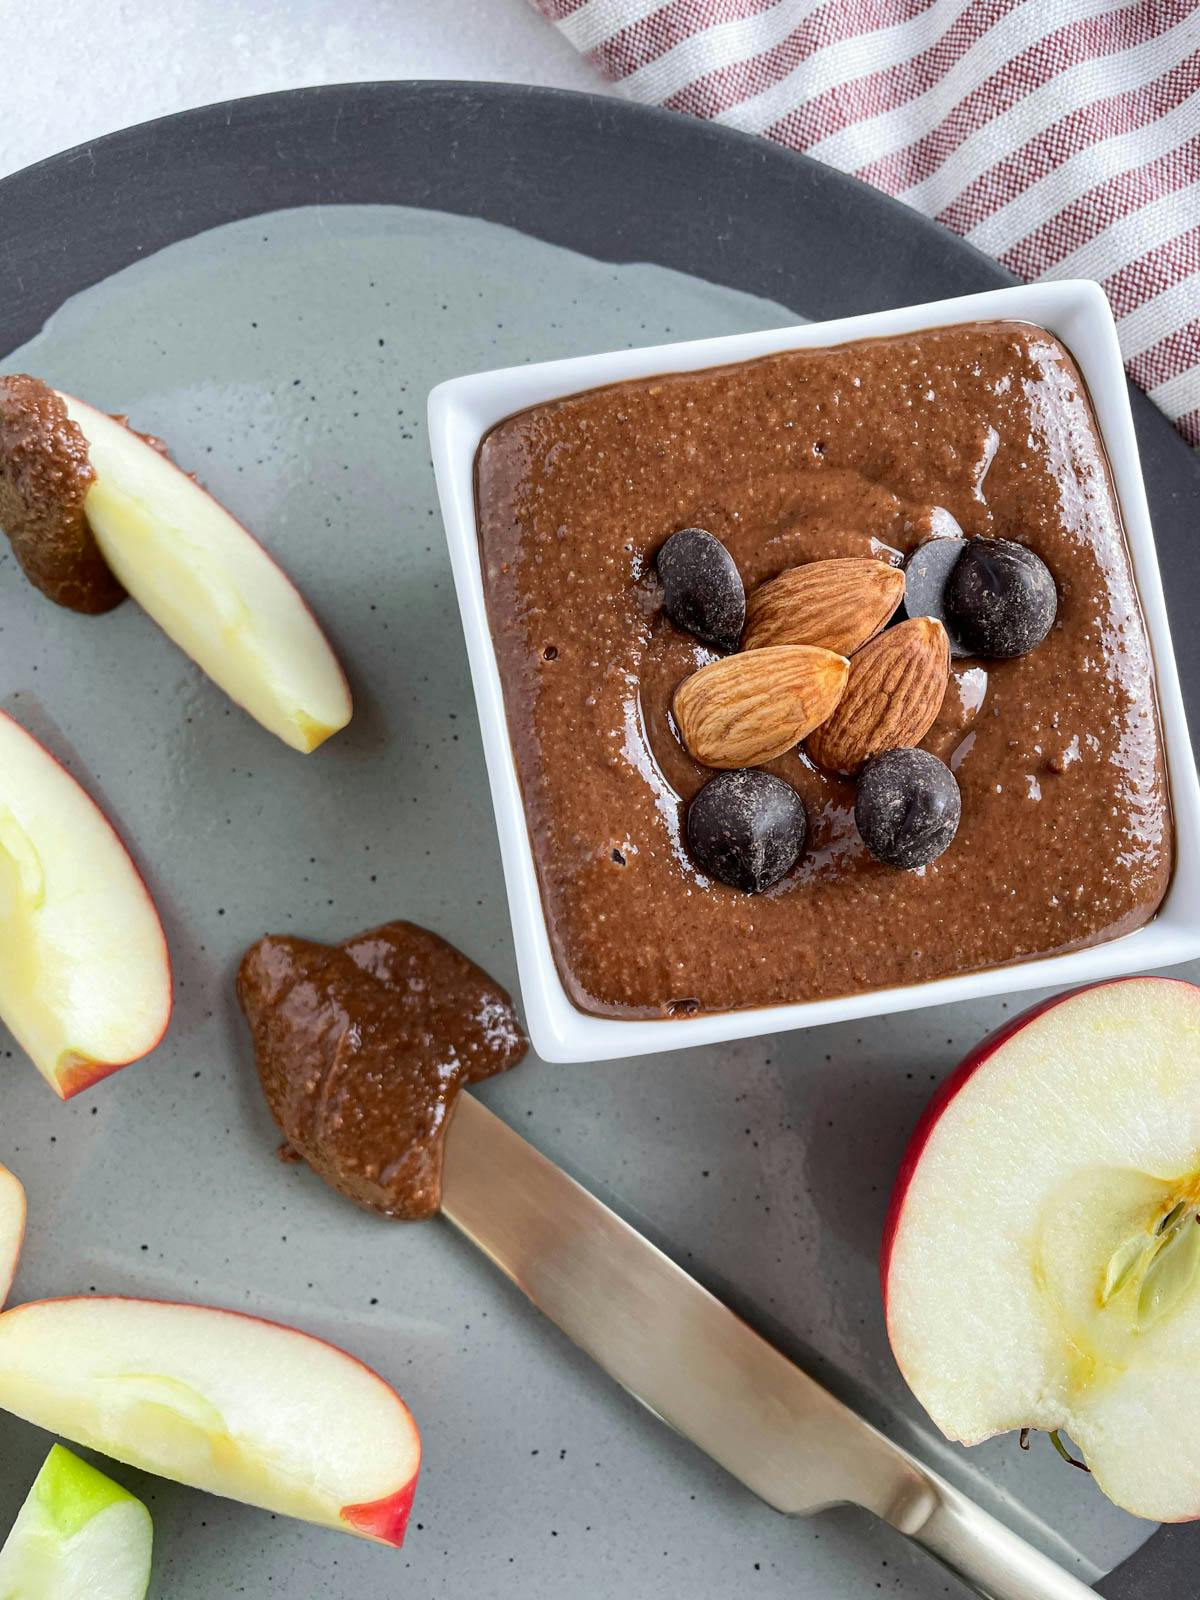 A small white dish of chocolate almond butter by some sliced apples.